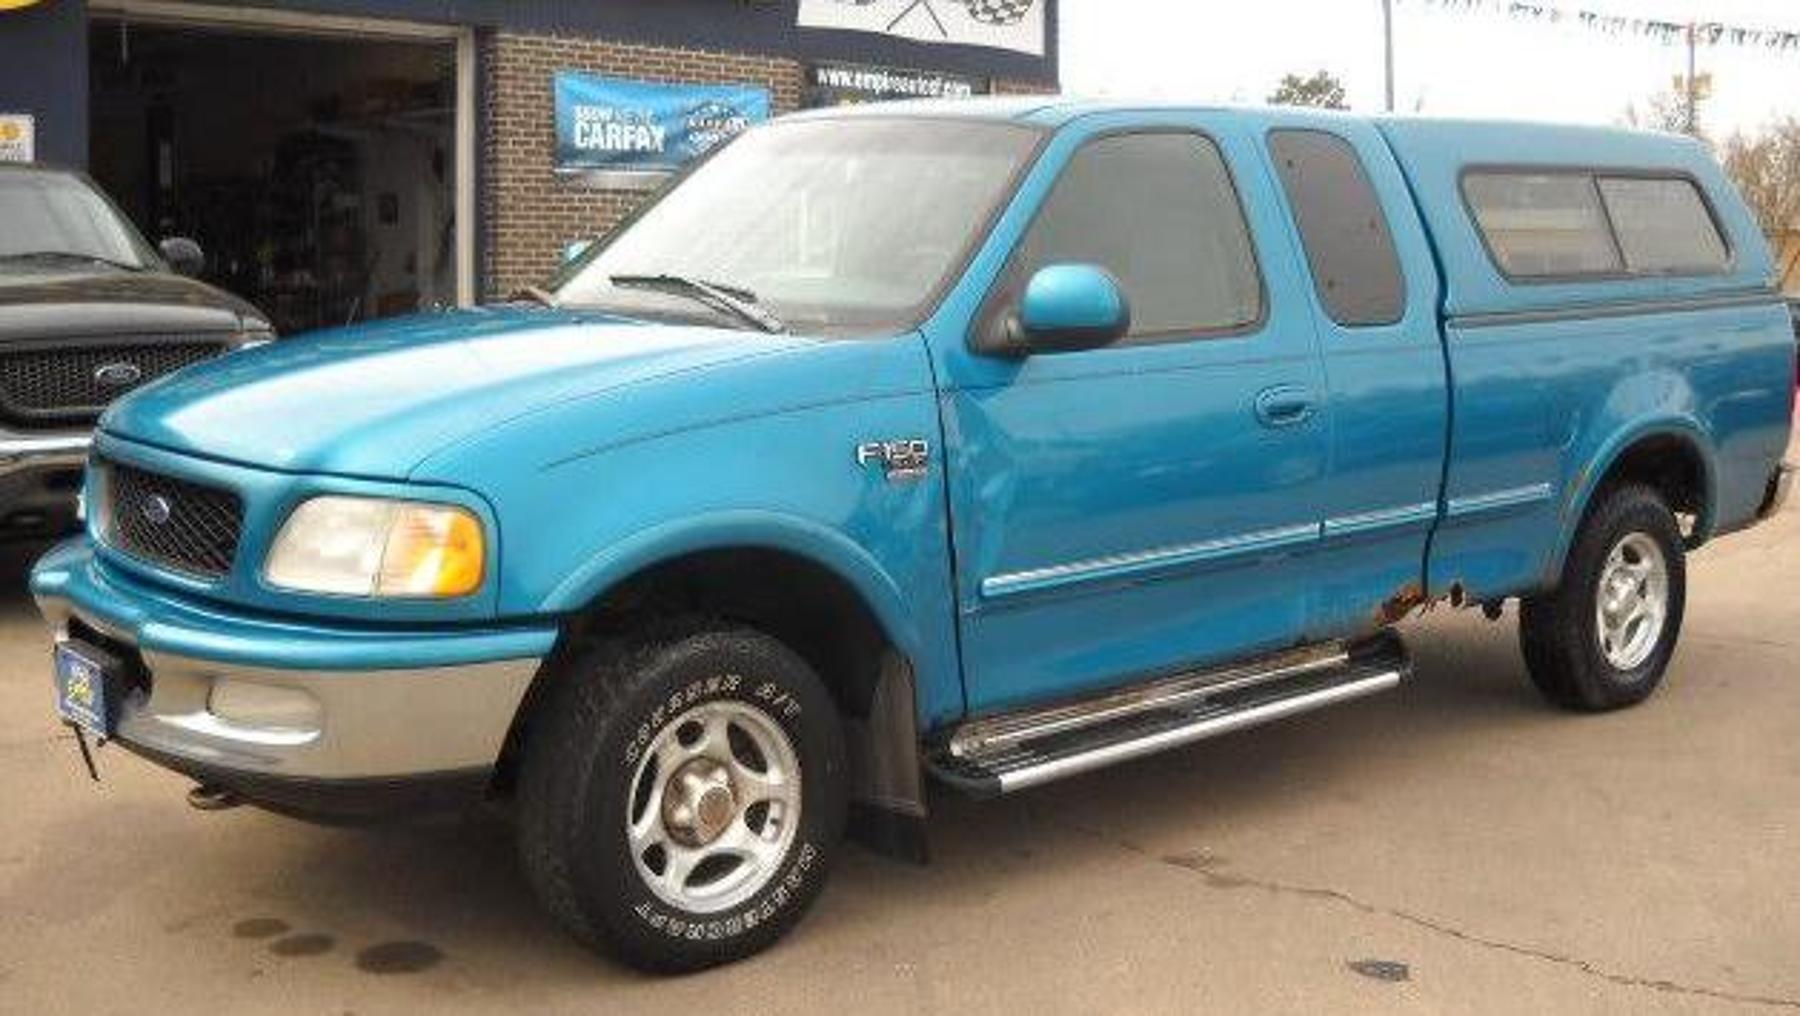 1998 Ford F-150 4X4 Ext Cab